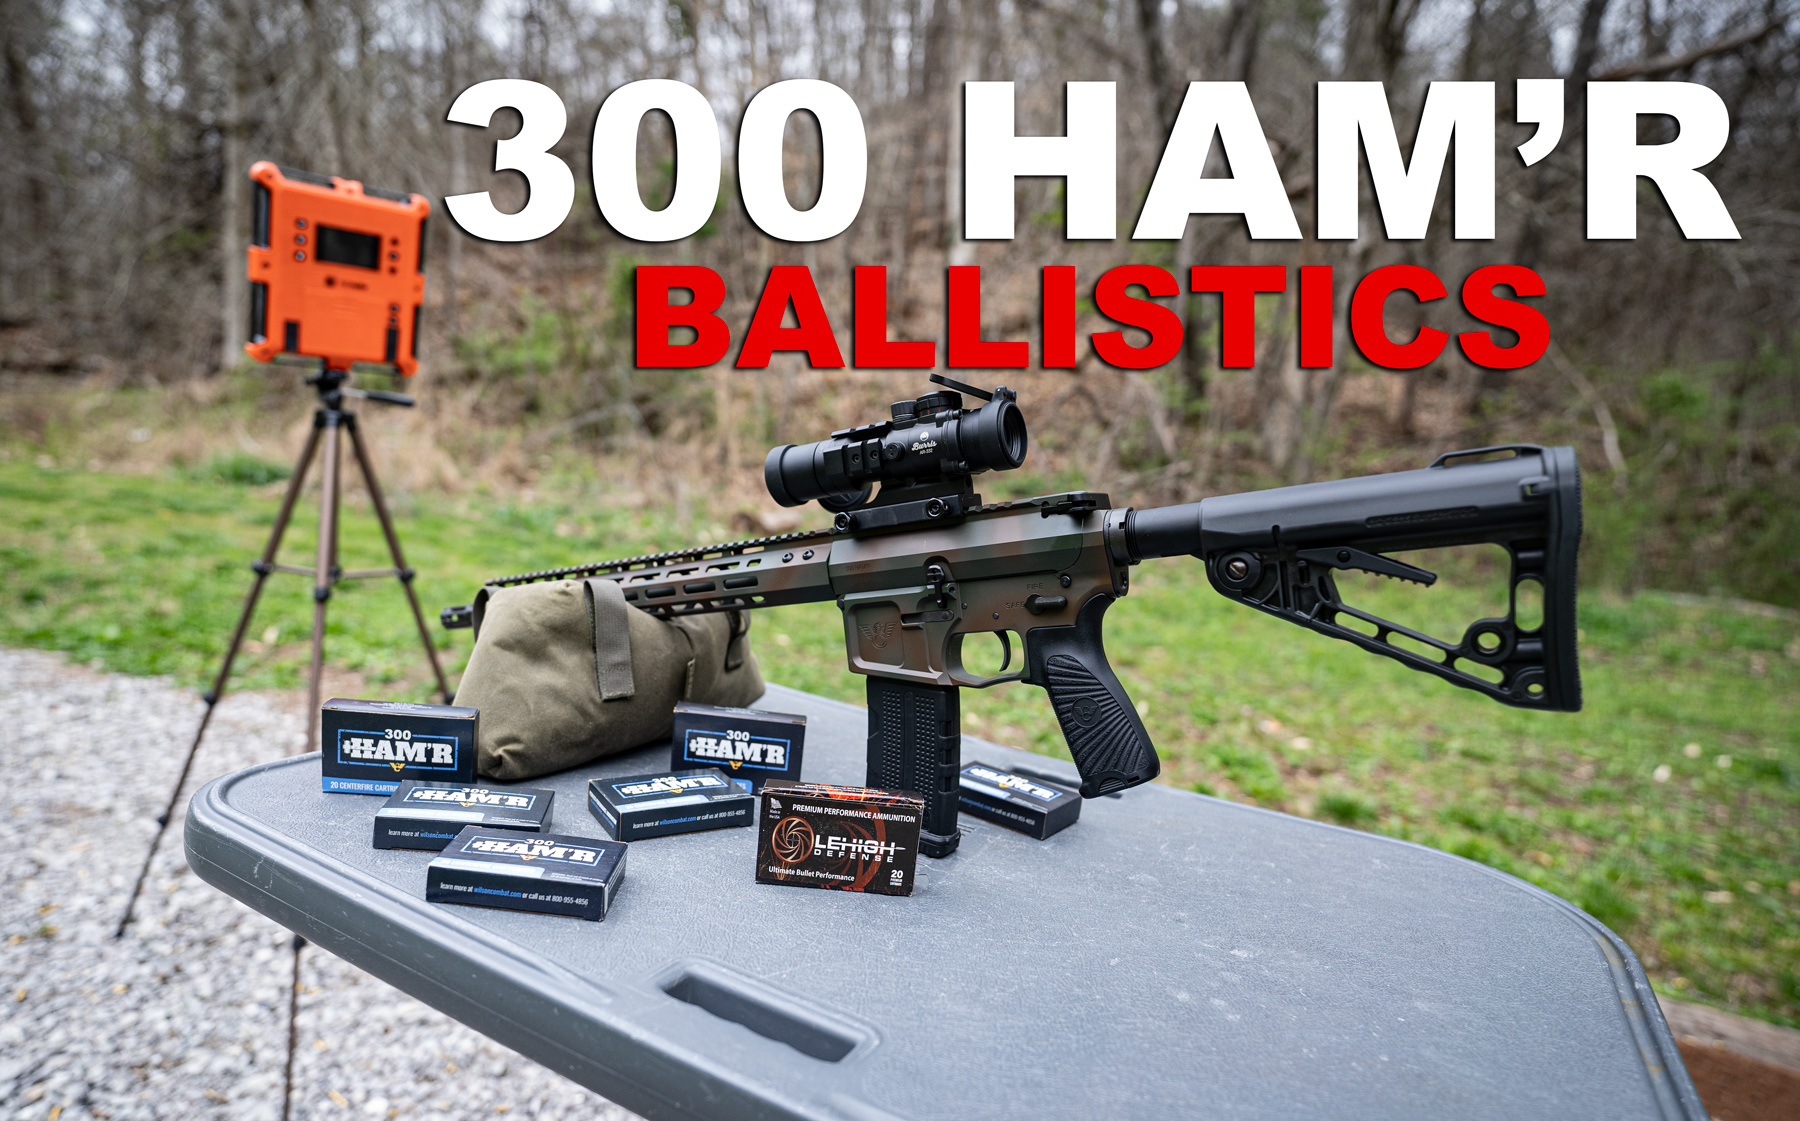 A 300 Ham'r rifle with ammo and a chronograph at the shooting range